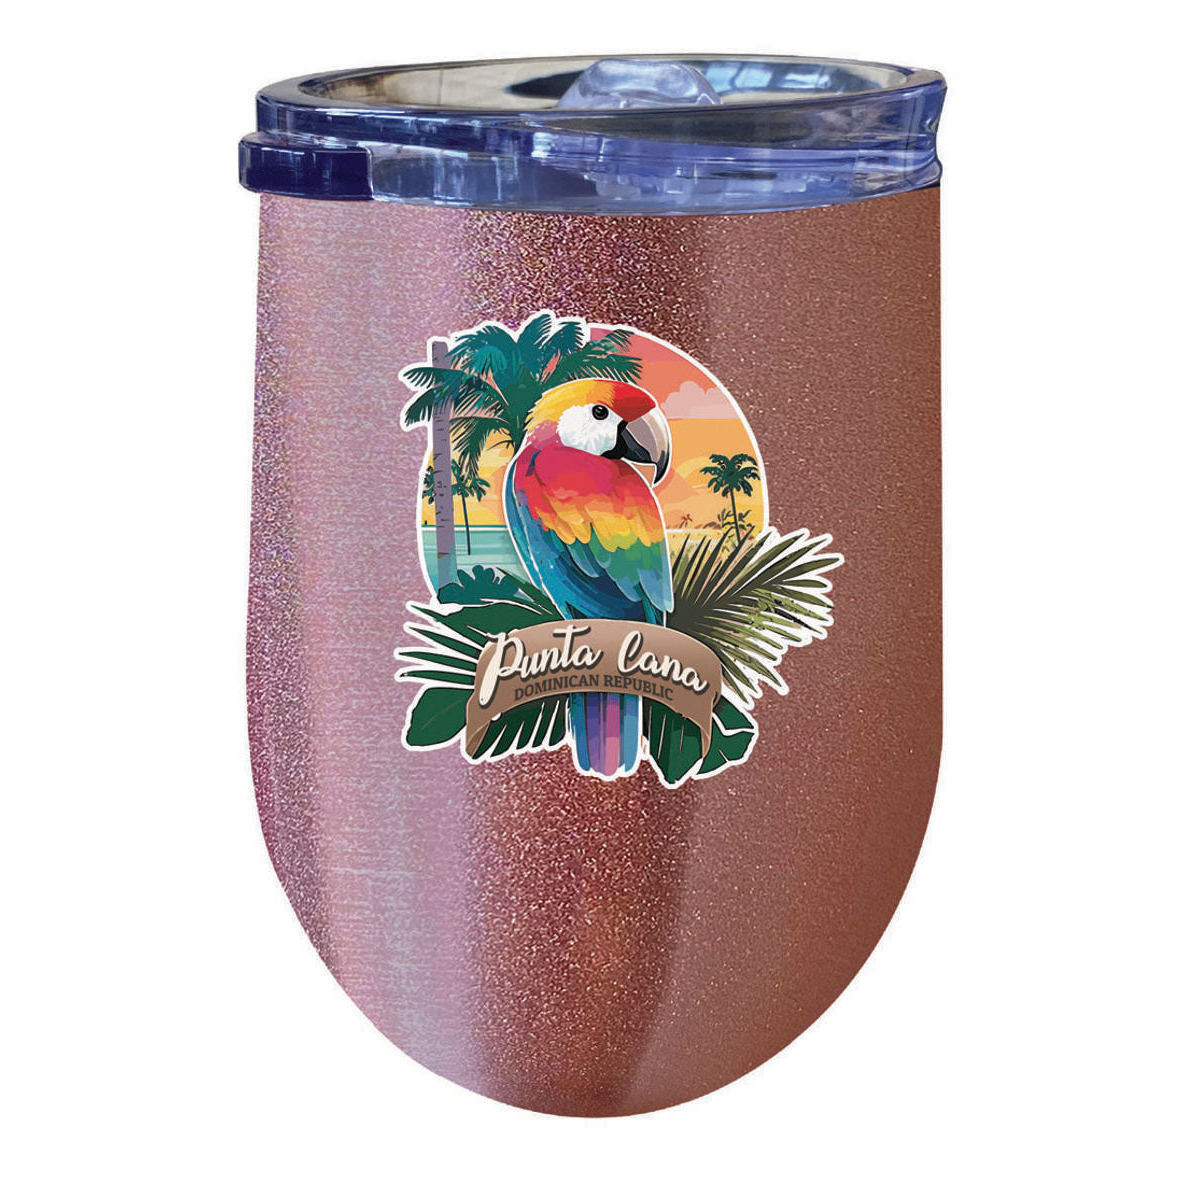 Punta Cana Dominican Republic Souvenir 12 Oz Insulated Wine Stainless Steel Tumbler - Rose Gold, PARROT